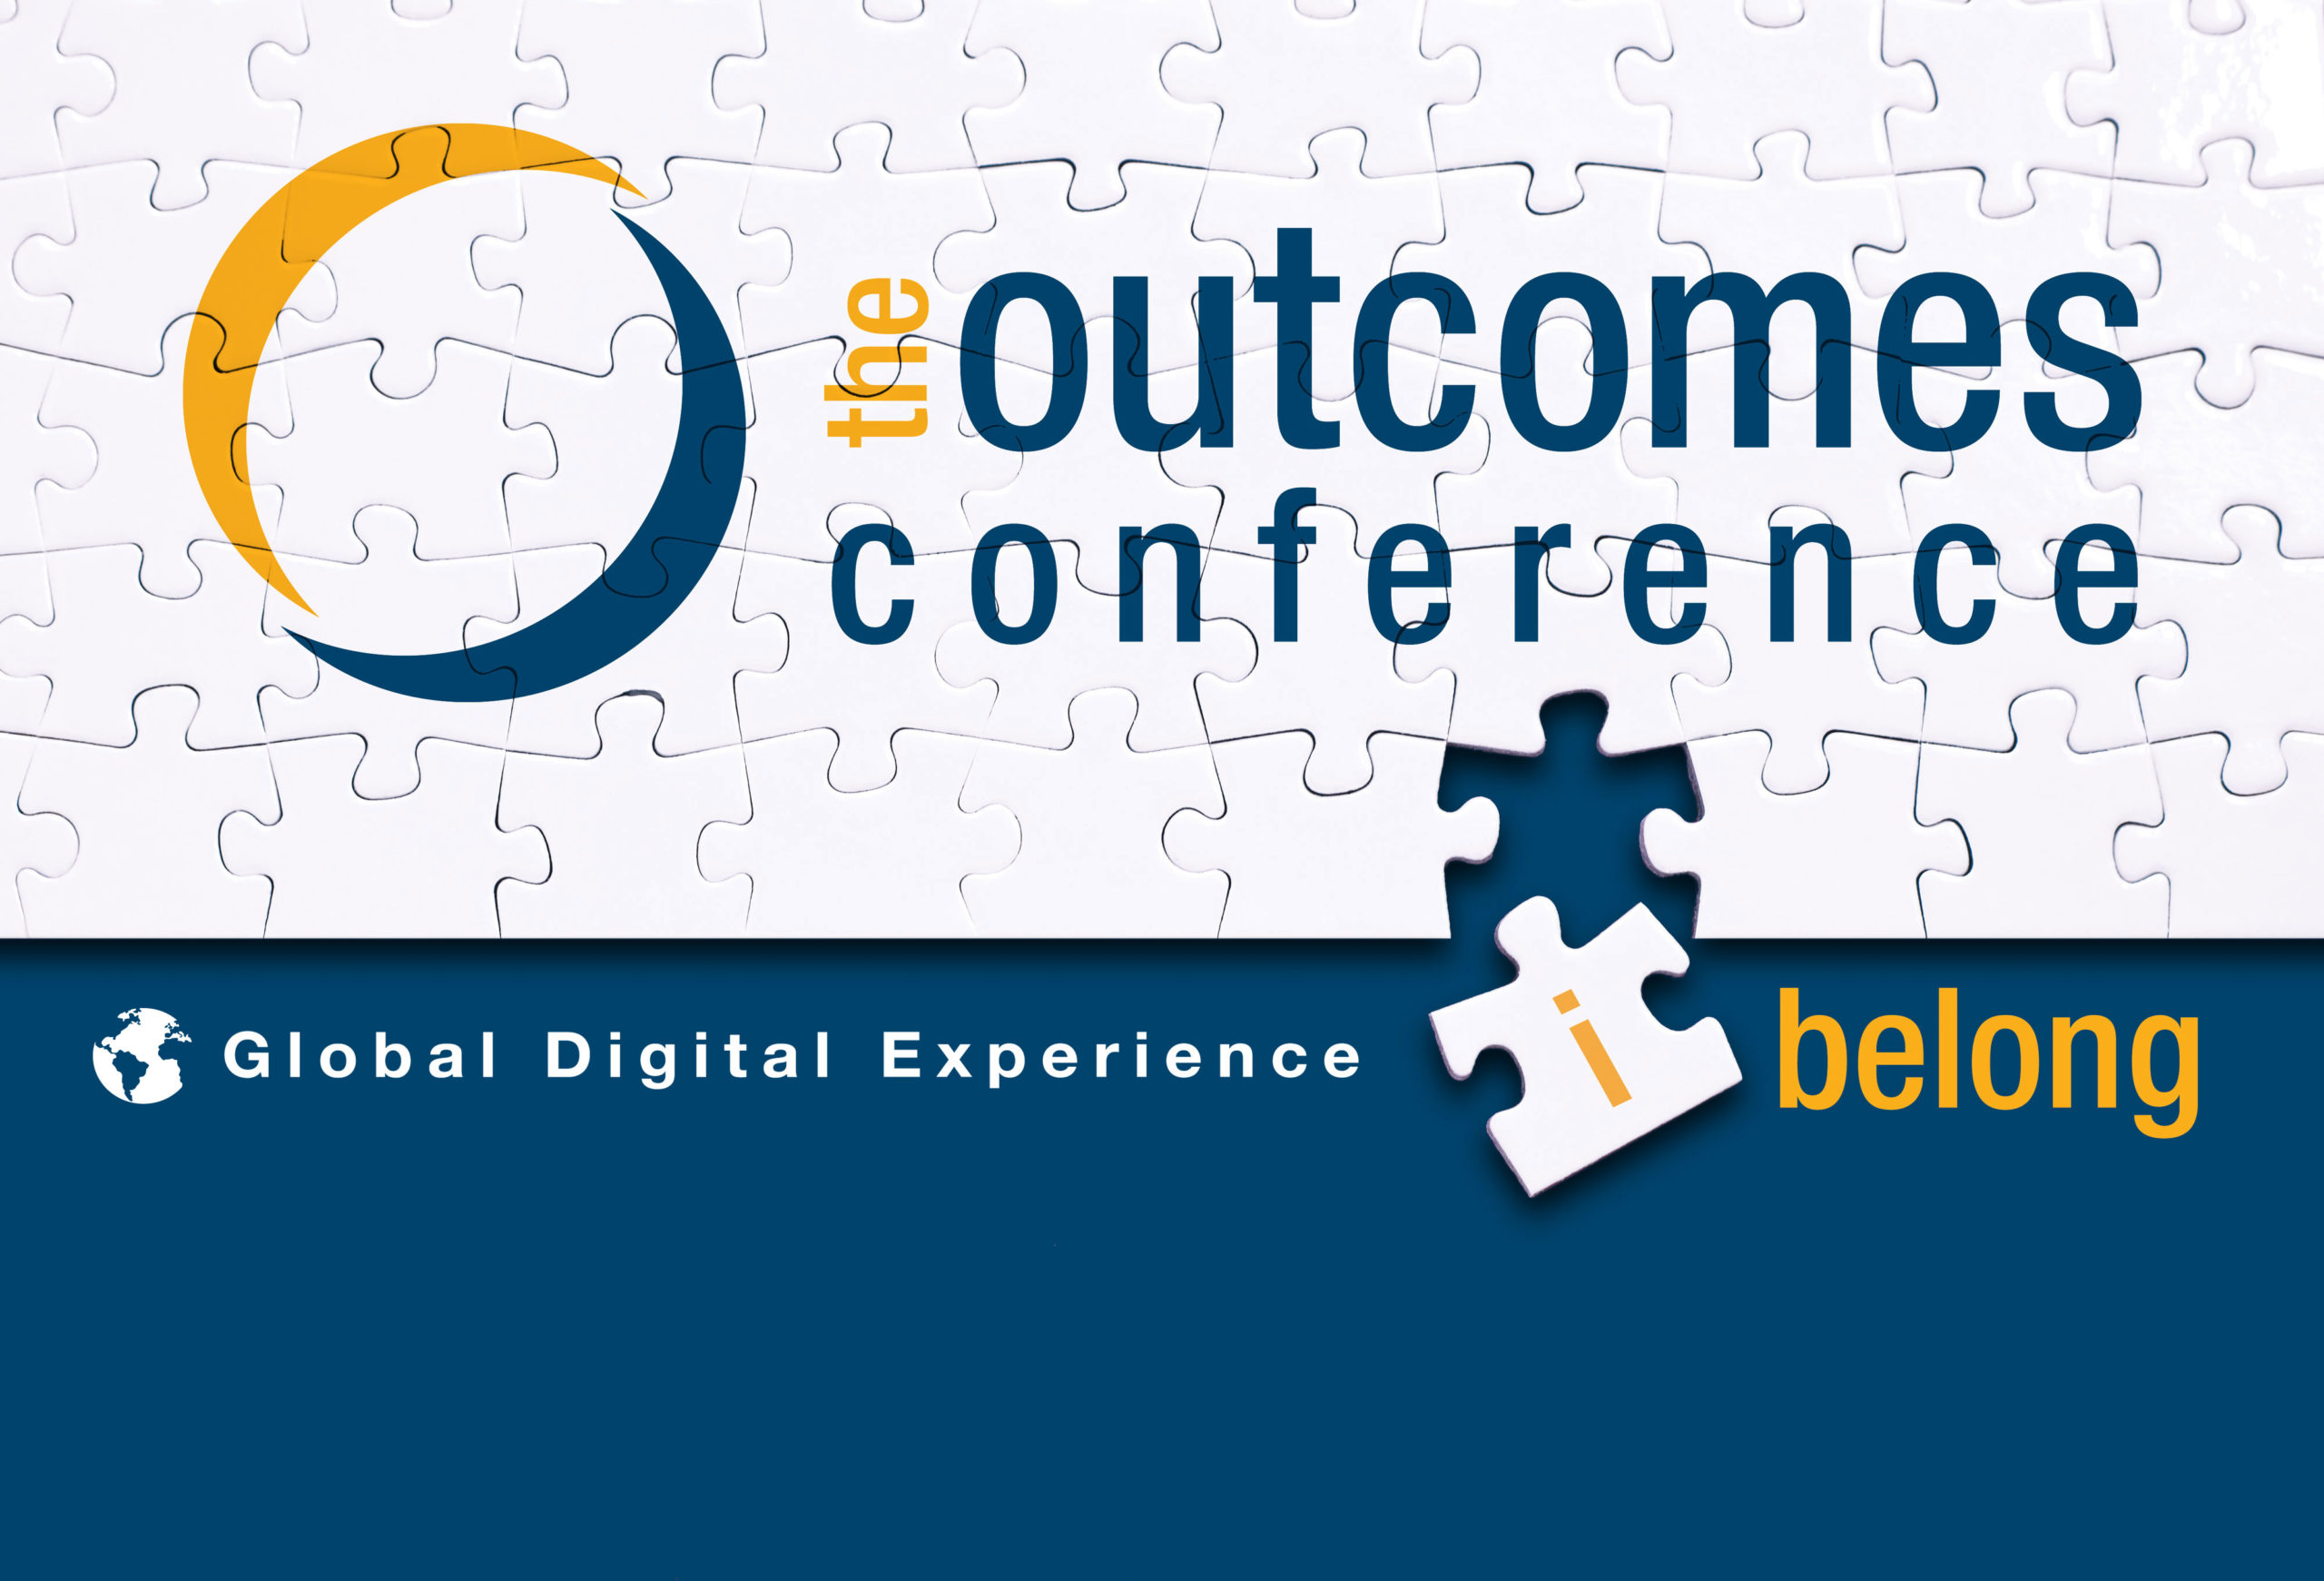 Outcomes Conference global